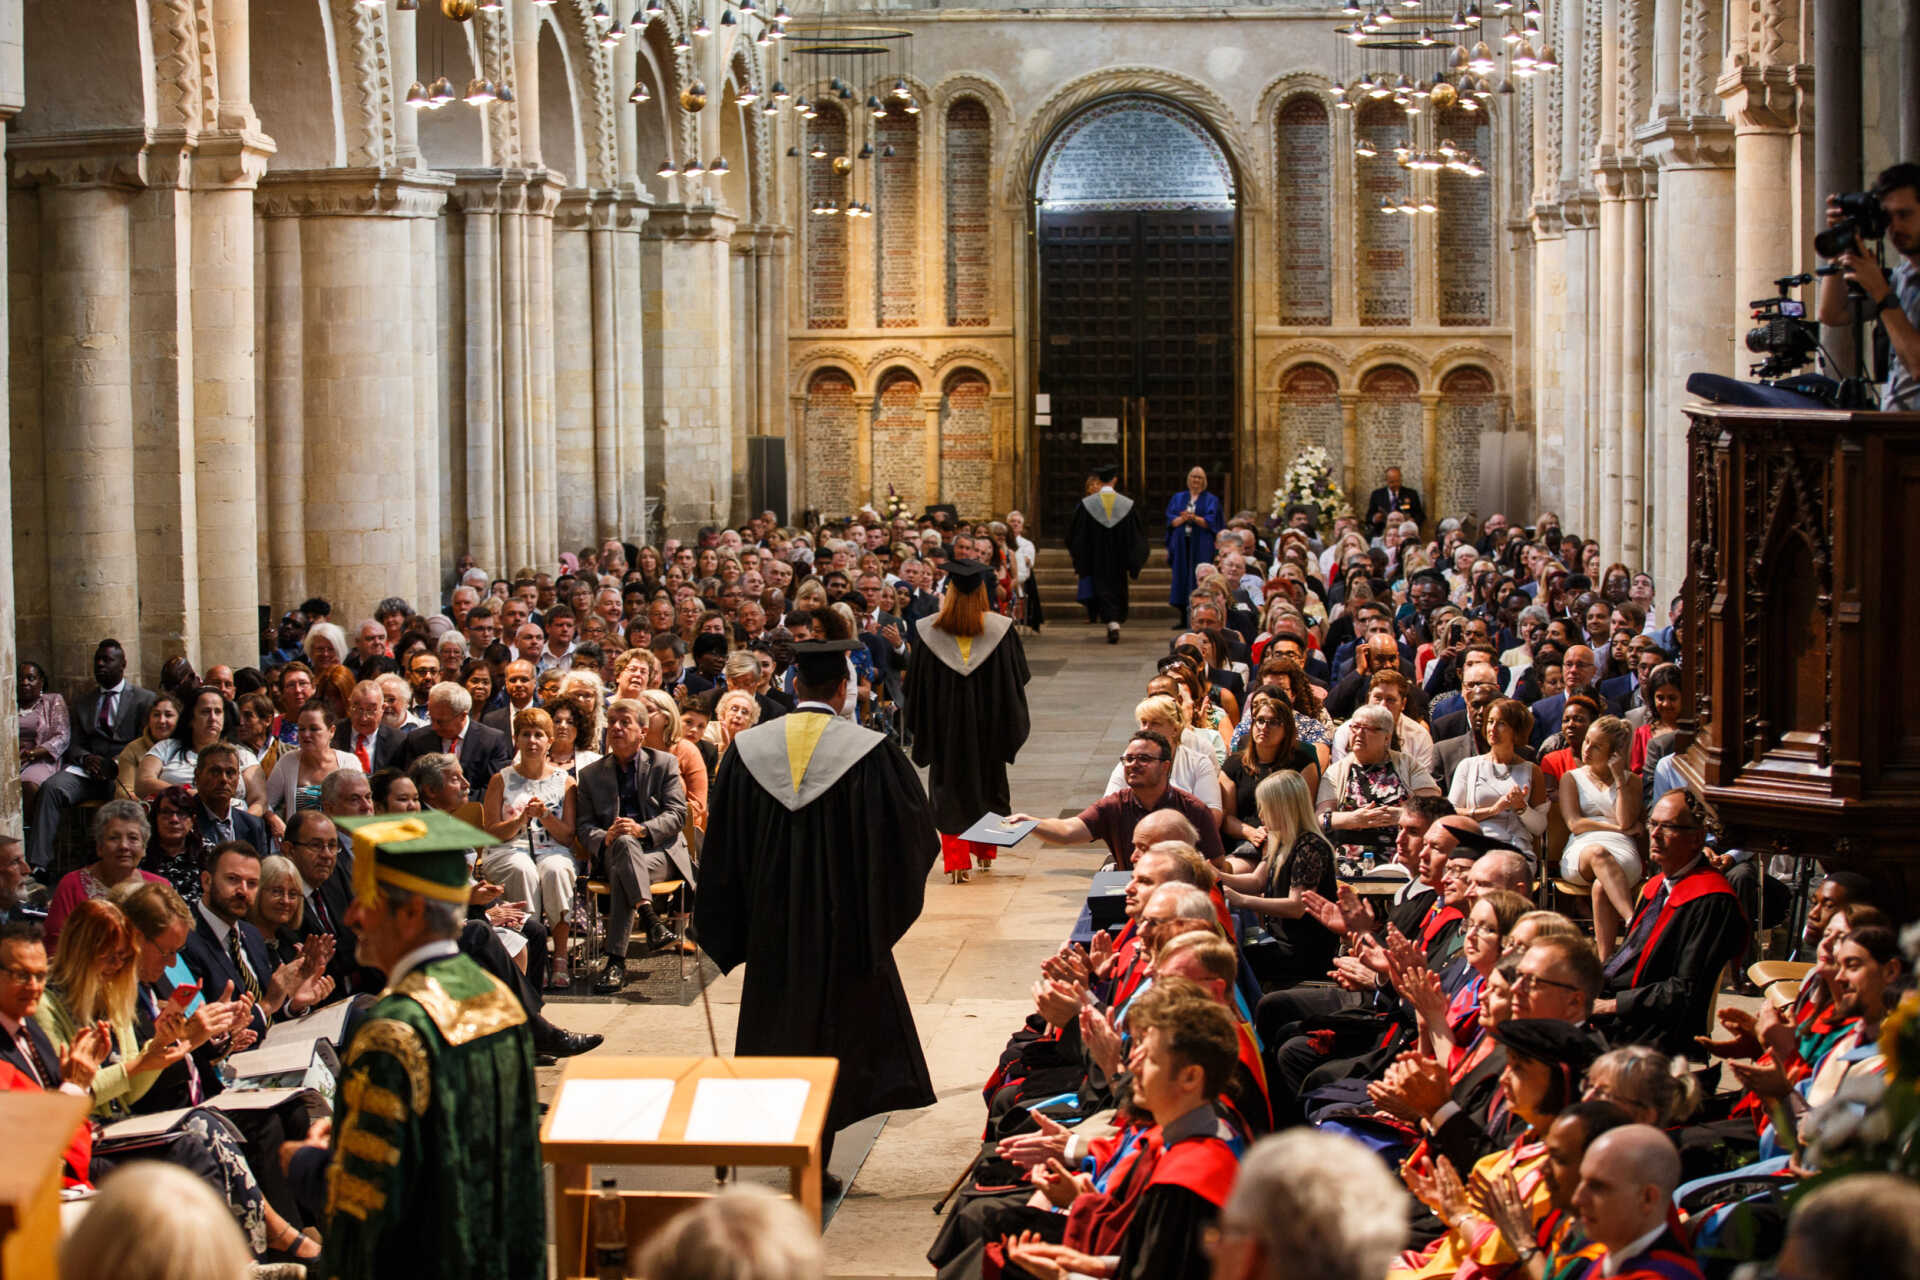 Students wearing graduation caps and gown process down the central aisle of Rochester Cathedral on graduation day